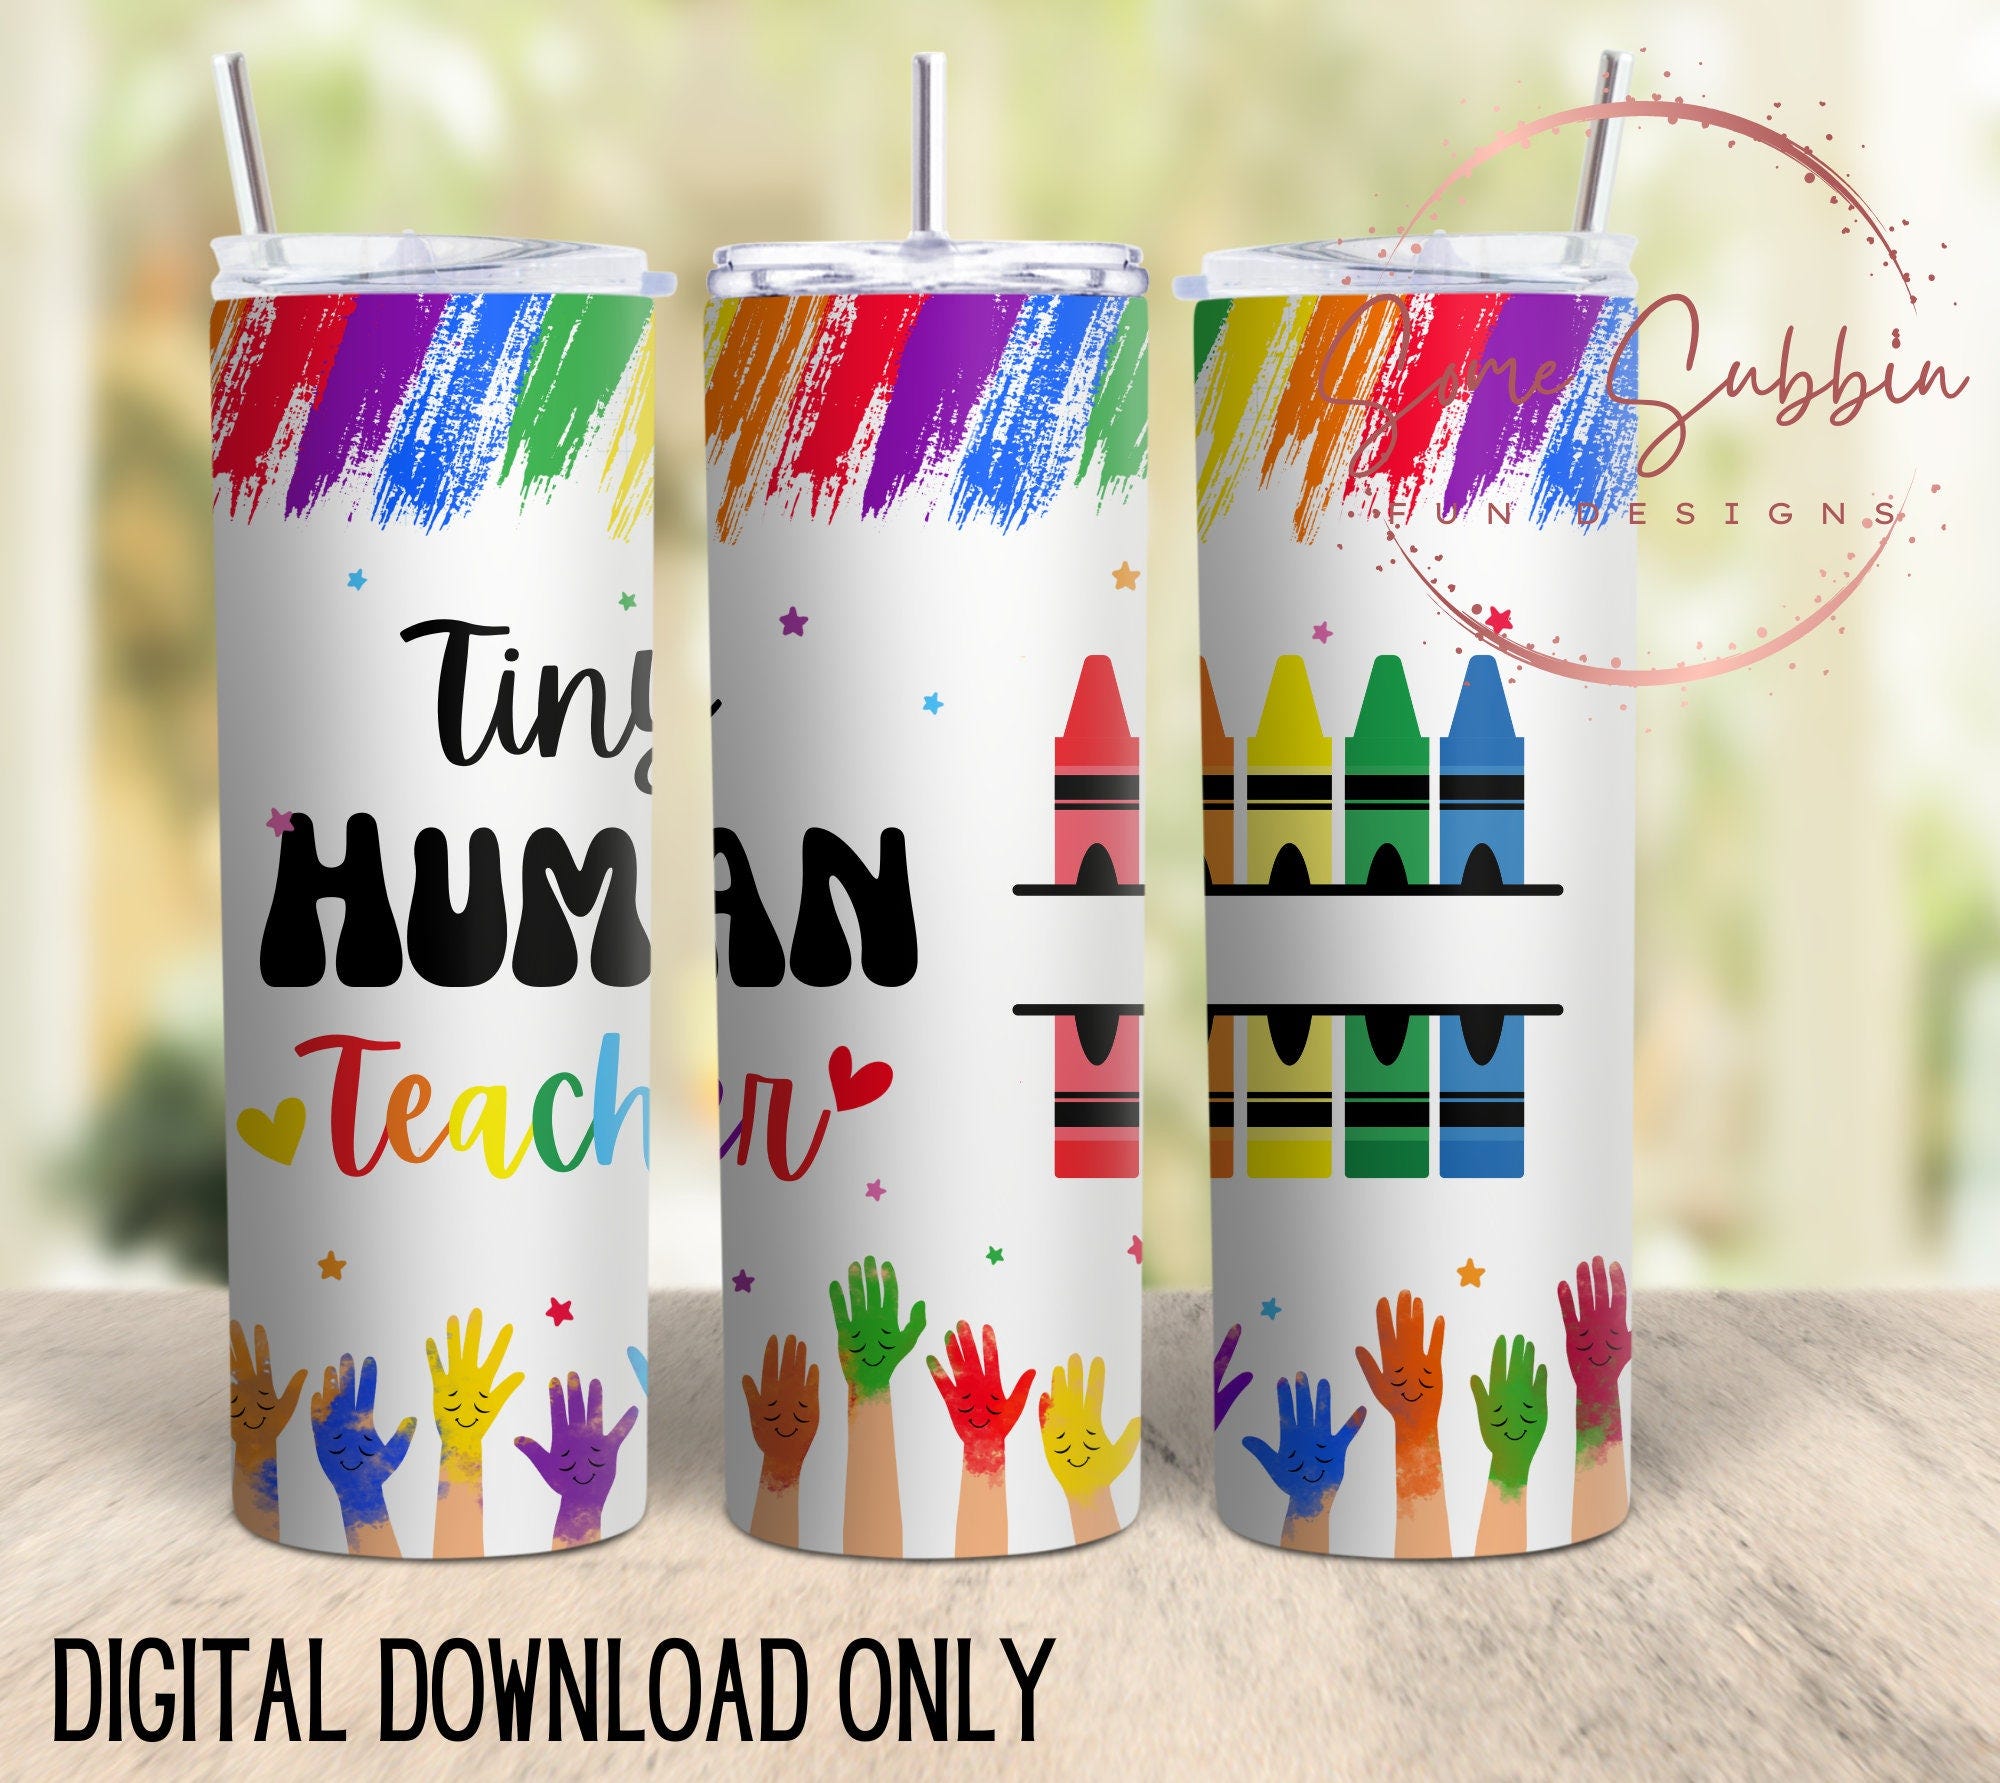 childcare PNG, tiny human teacher download, childcare tumbler wrap, teacher tumbler wrap, Digital download ONLY, tiny human teacher wrap